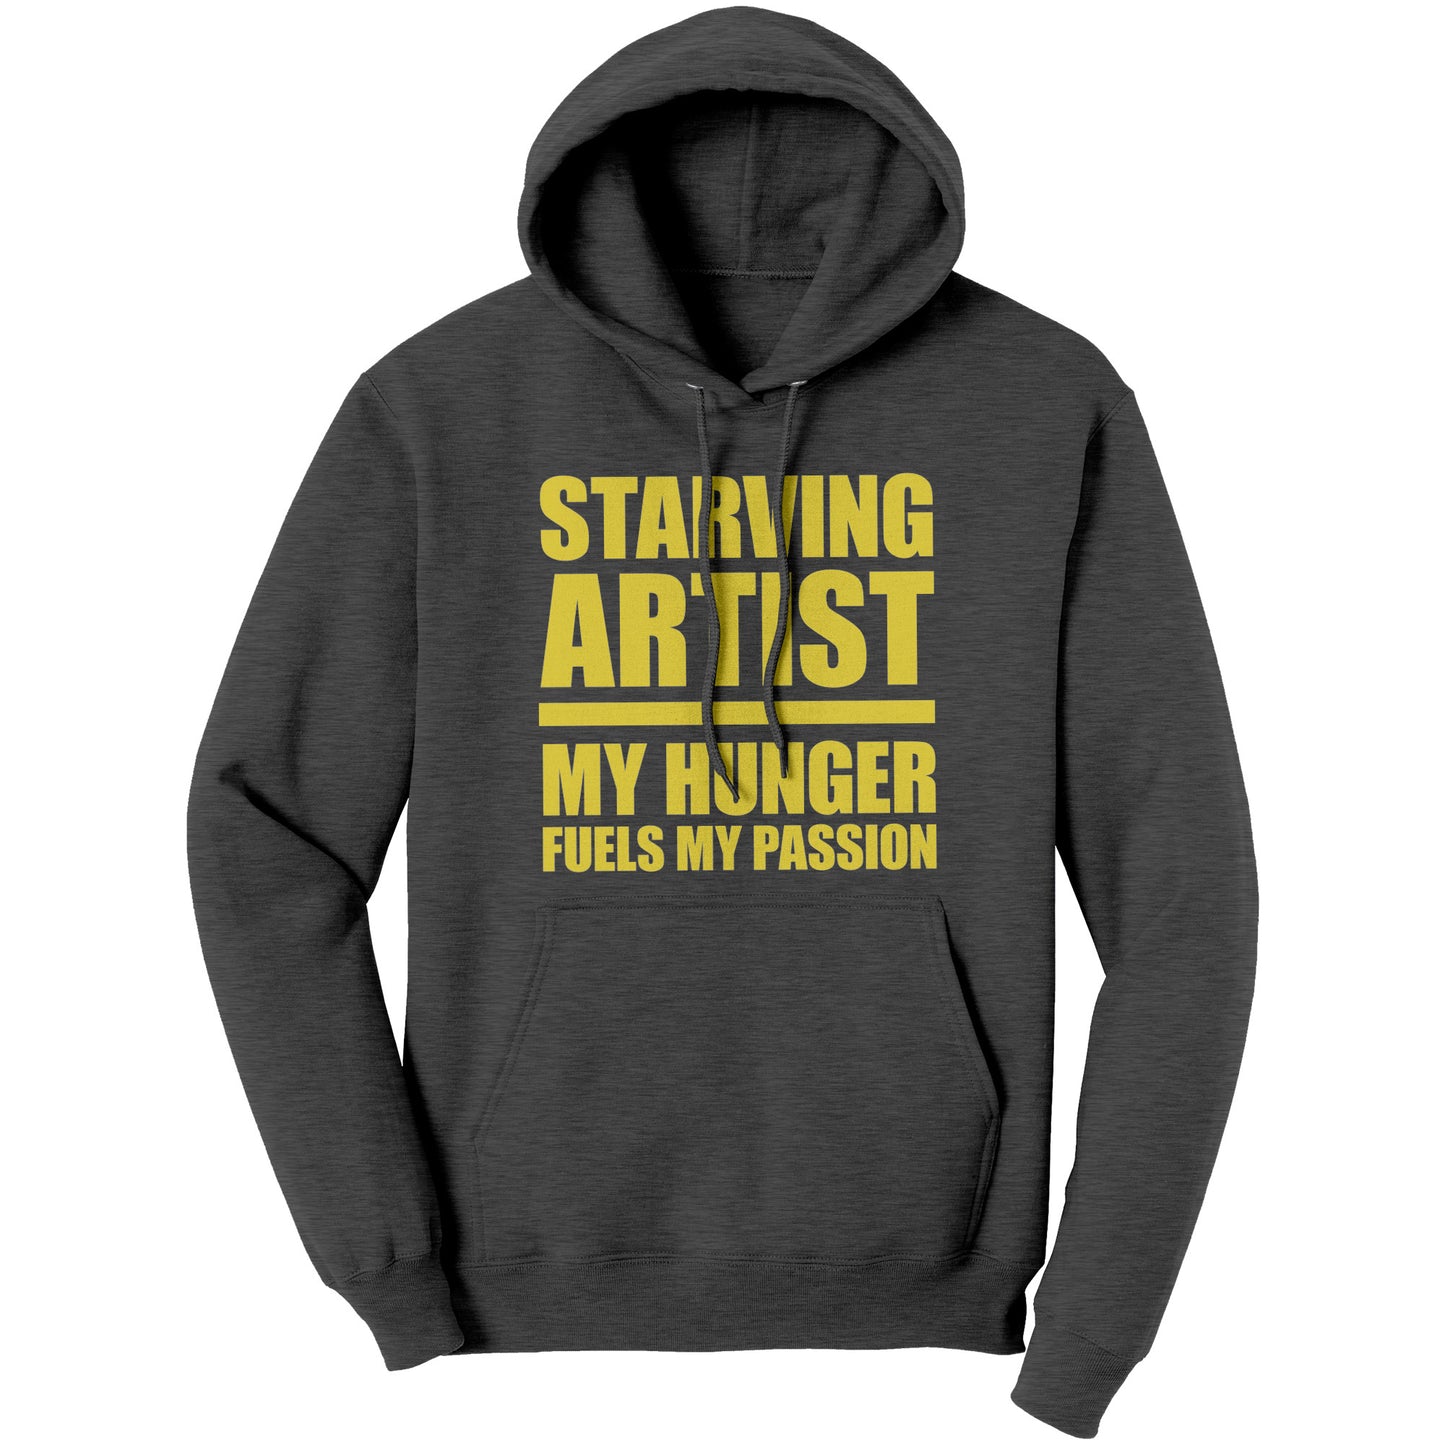 Hunger Fuels My Passion Hoodie